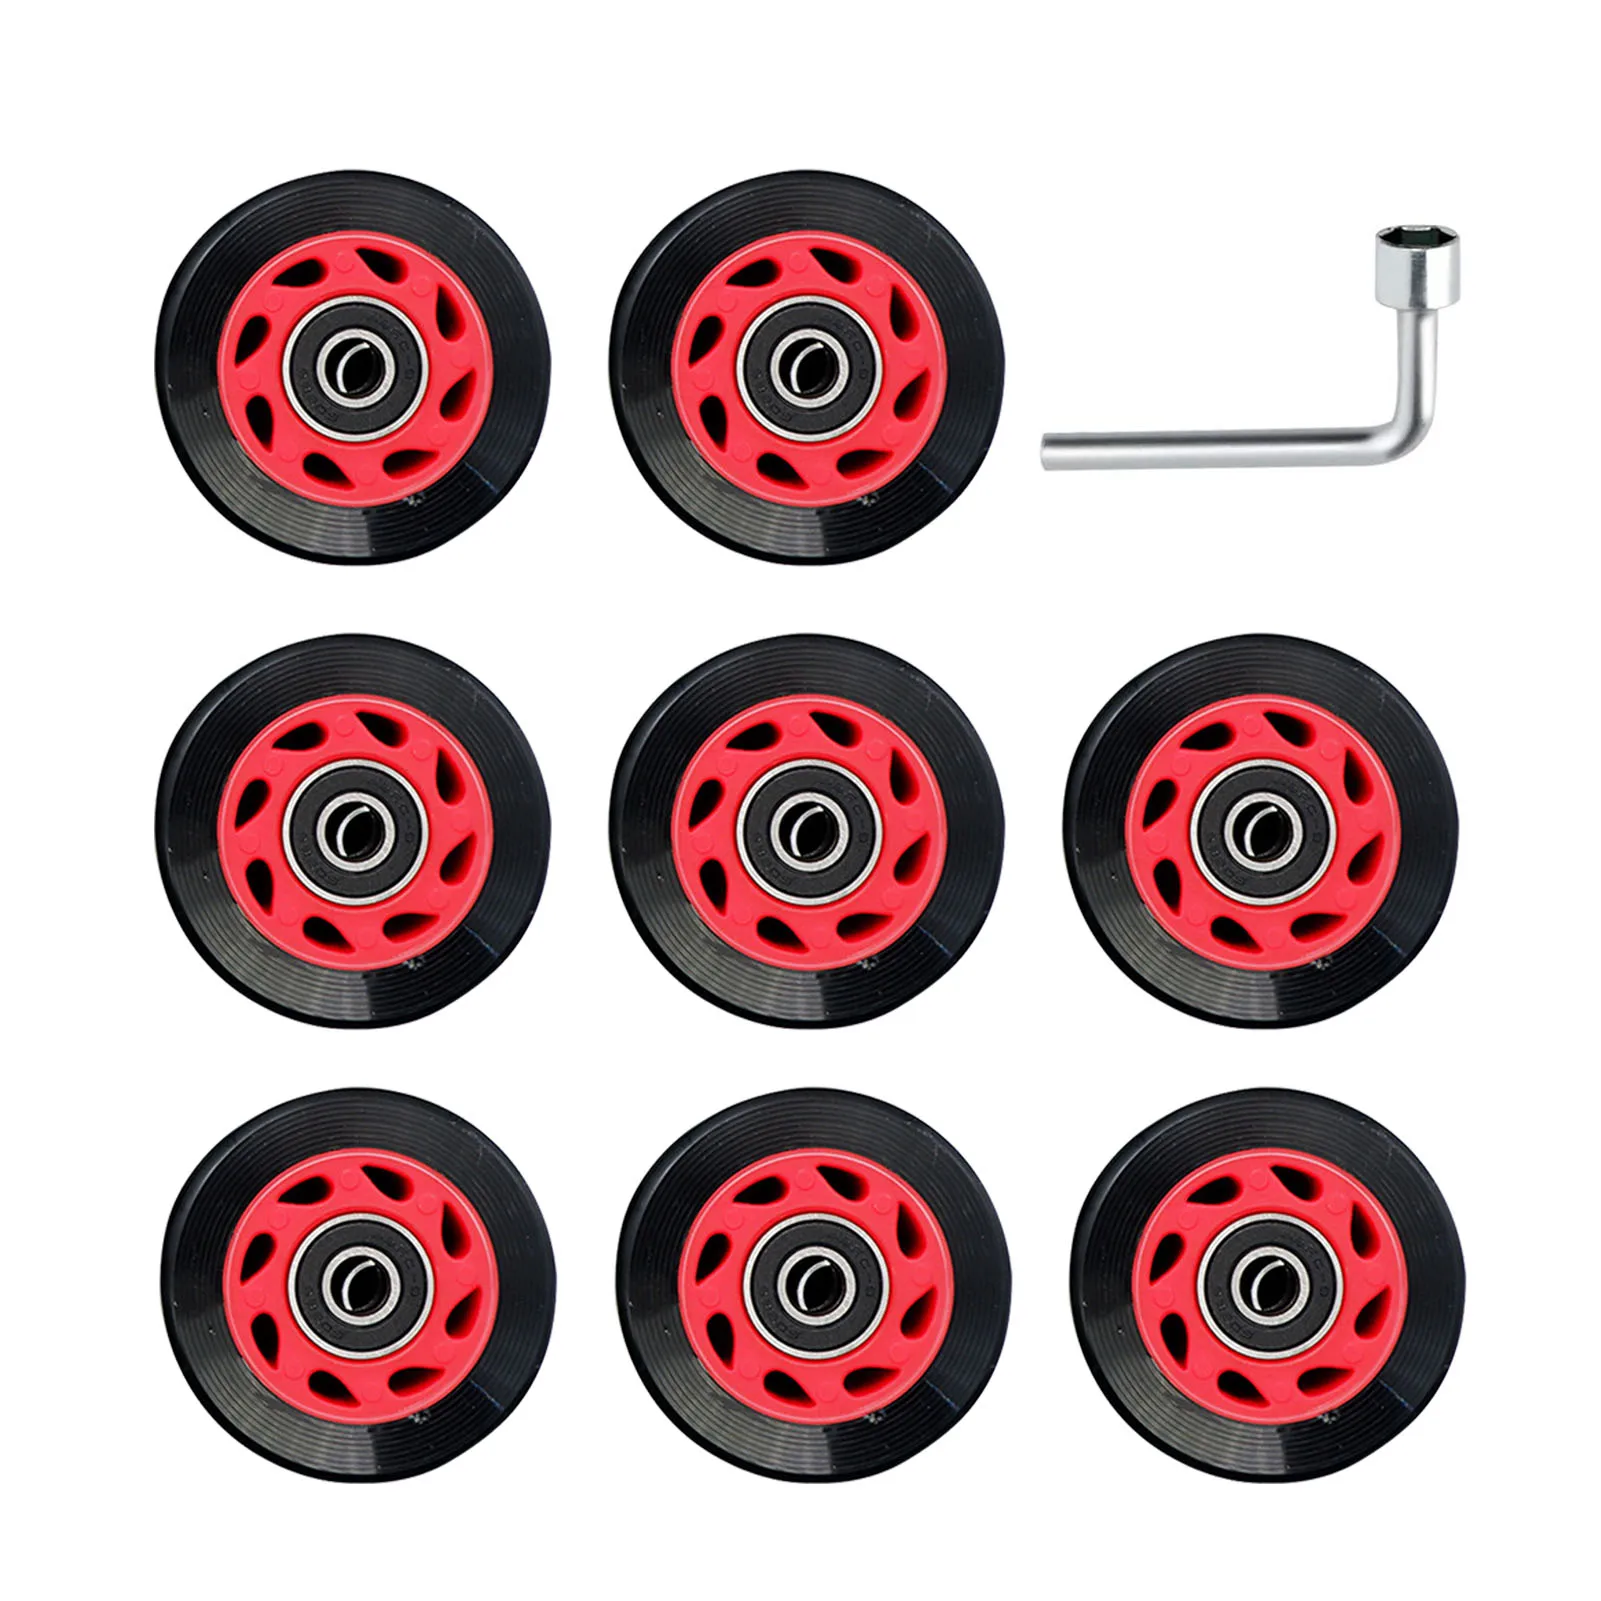 

8pcs Roller Skate Wheels PU High Hardness Wear Resistant Wrench Replacement Parts With Bearing Non Flashing For Adults Kids 82A